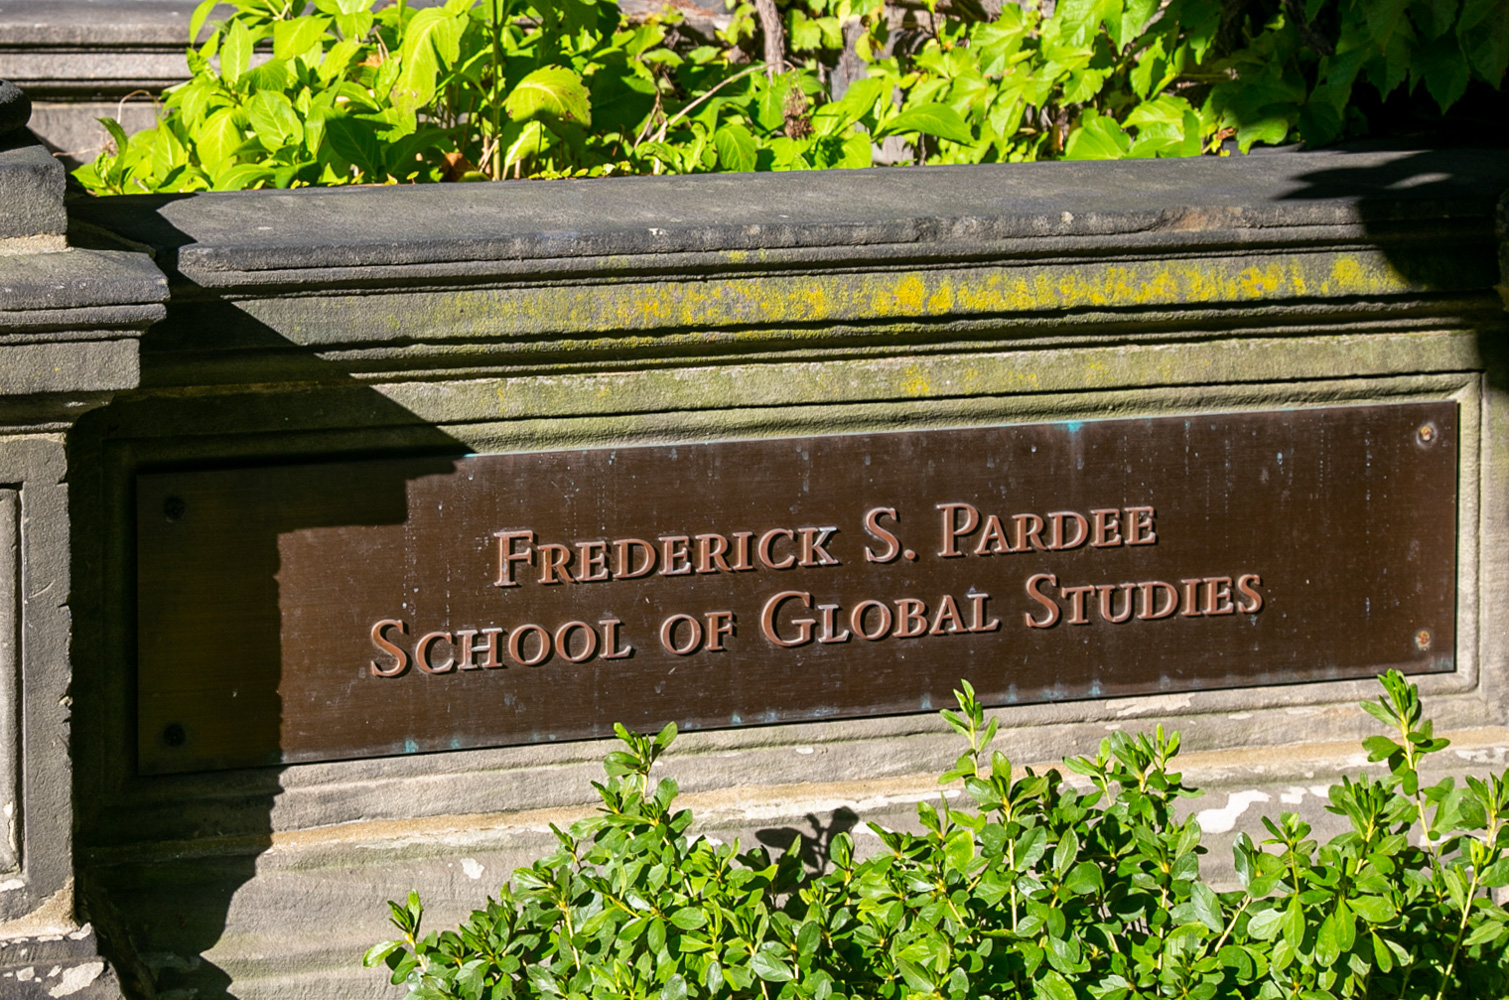 a plaque that says "Frederick S. Purdy School of Global Studies"